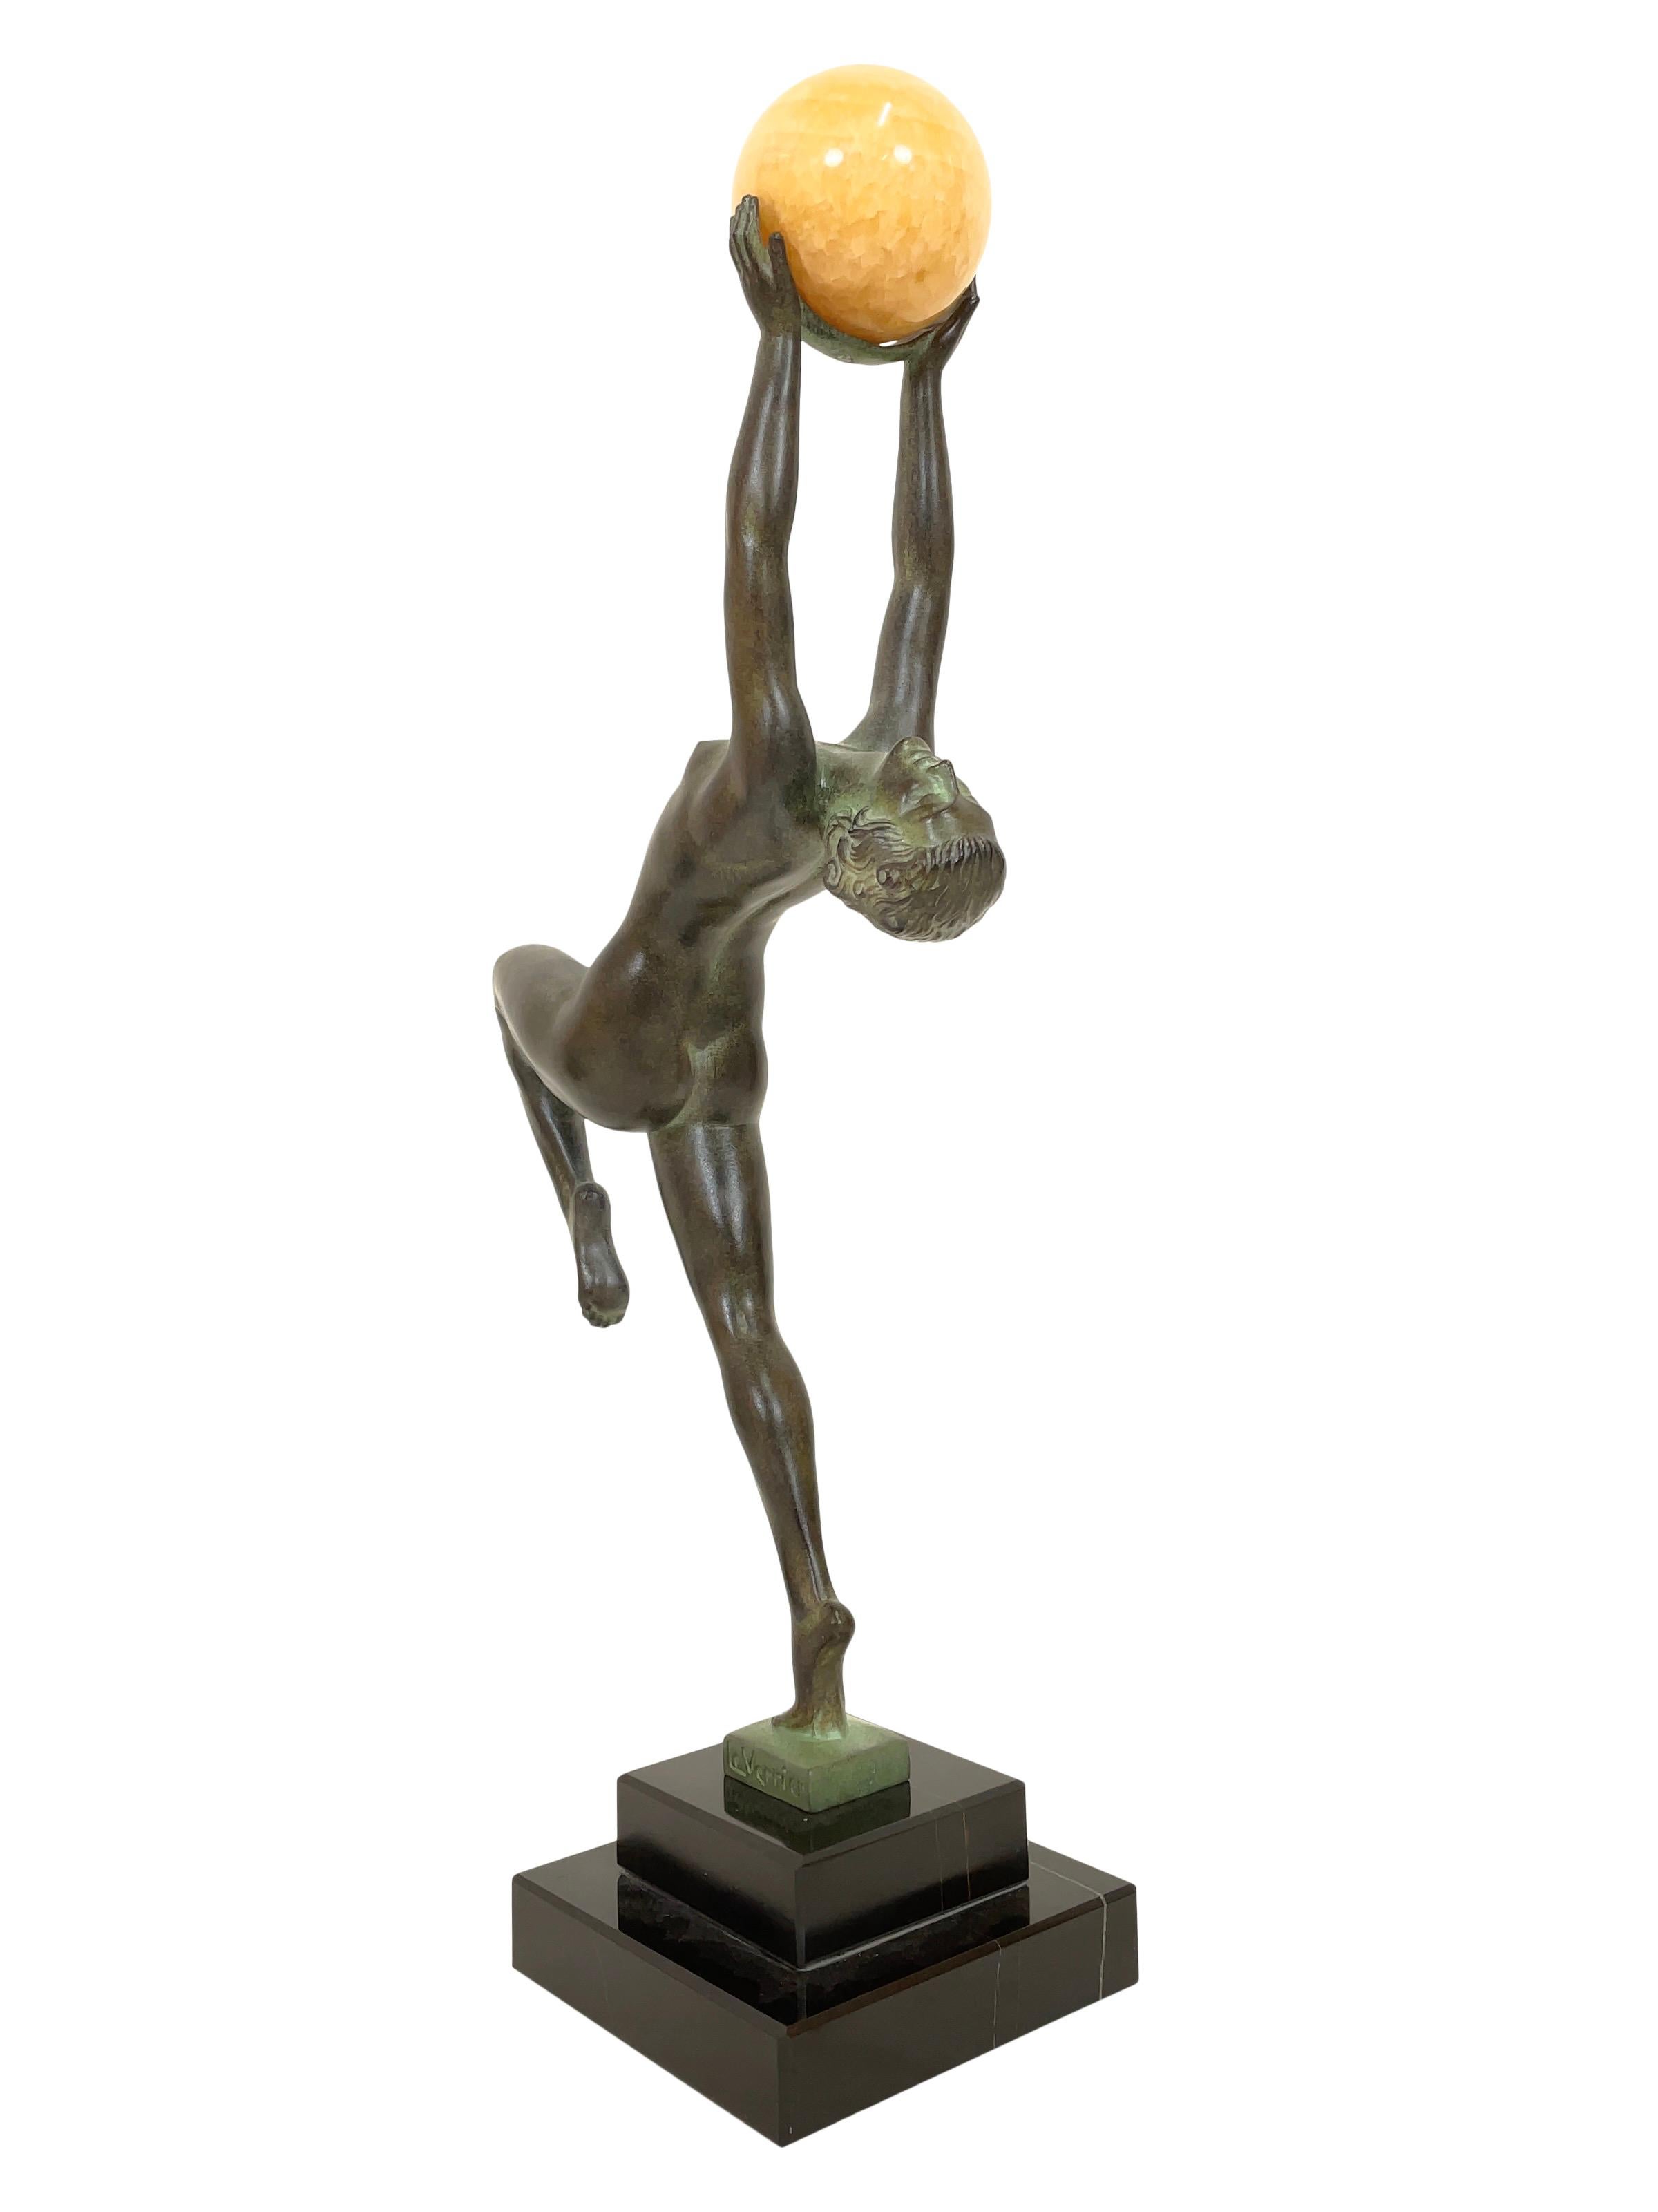 Contemporary Jeu Sculpture in Spelter with an Onyx Ball from Max Le Verrier in Art Deco Style